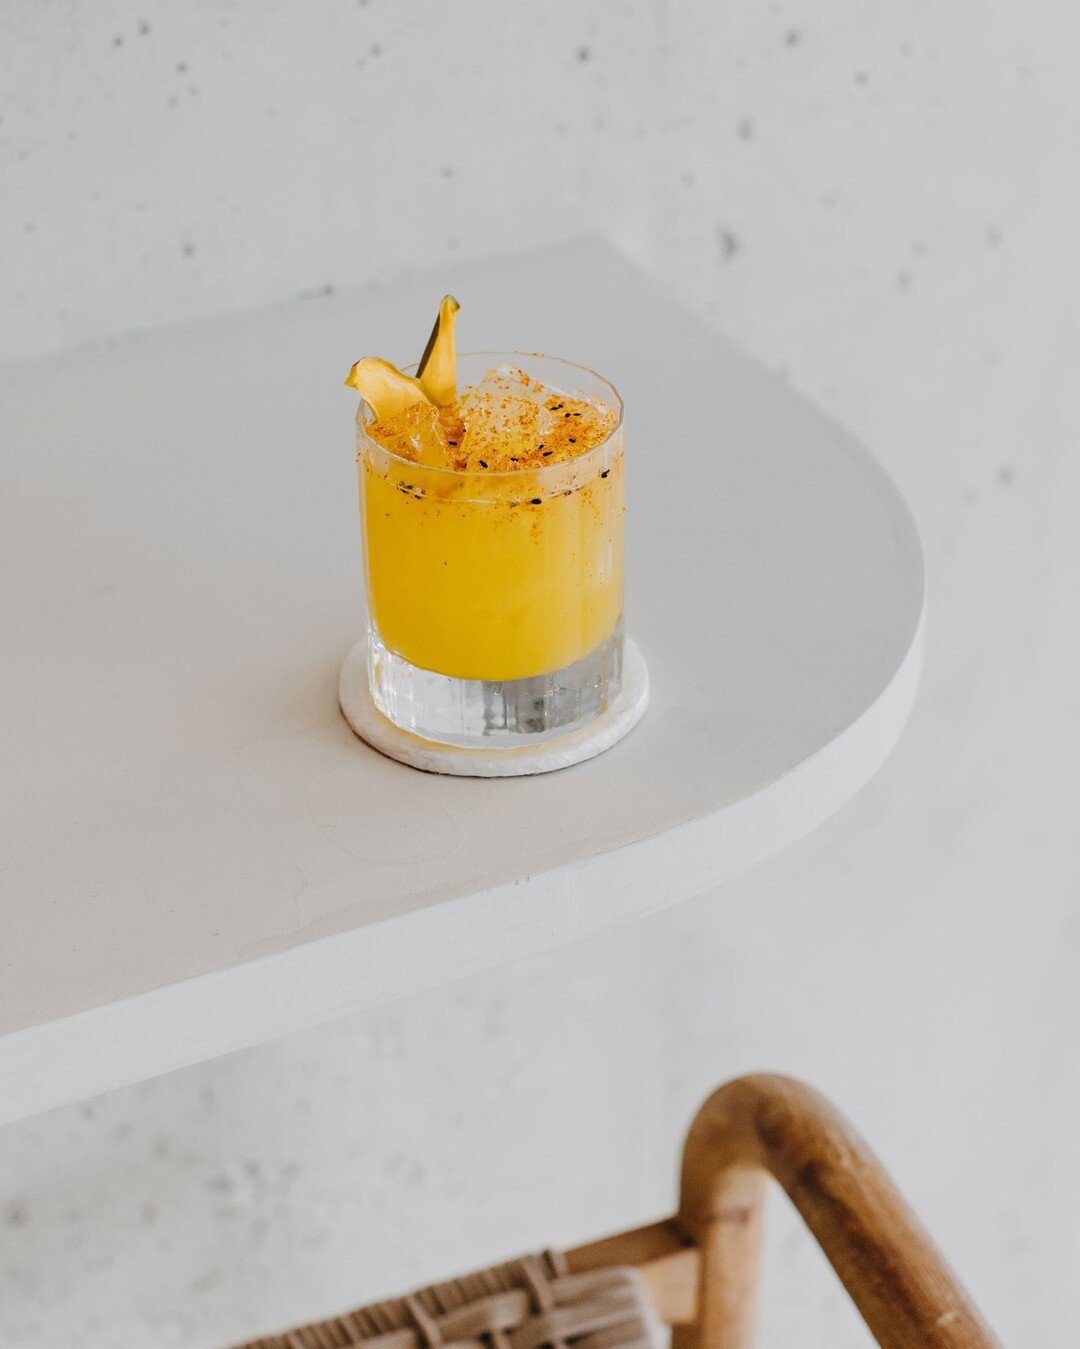 Queen of cocktails, and a classic. The Margarita is sweet, sour, salty, and why not add a kick?! 🥭 Our Spicy Mango Margarita is a house creation of chilli infused tequila and rich mango. It's the perfect start to your lunch at Little Bay Bar &amp; E